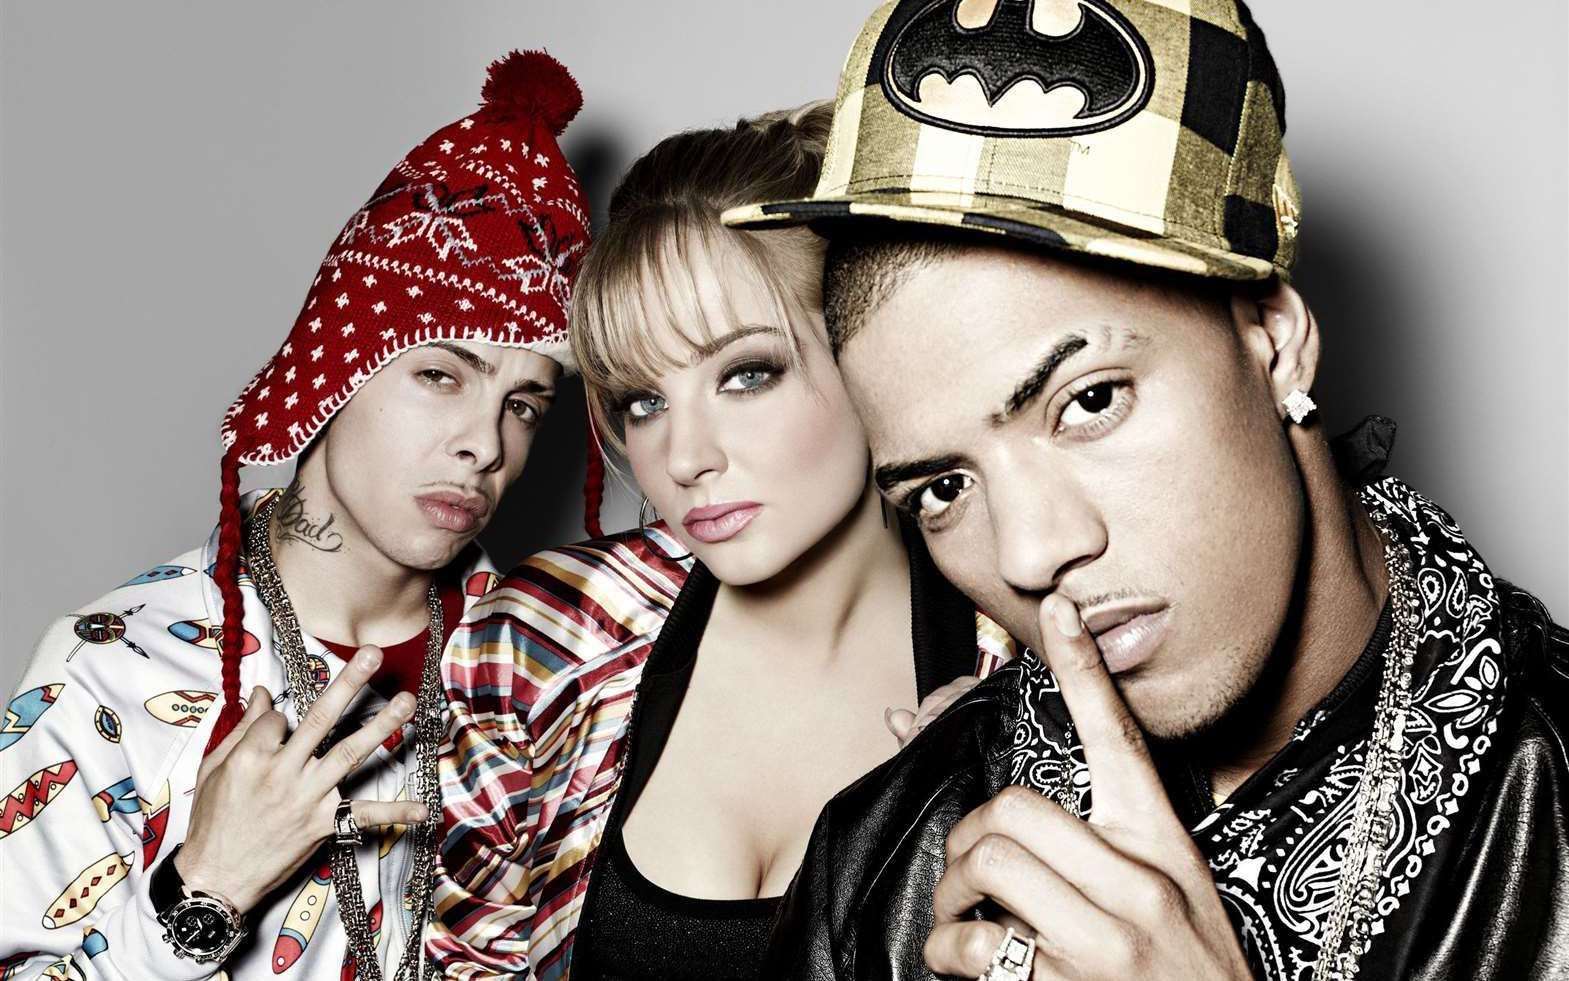 N-Dubz are playing in Margate as part of their sell-out reunion tour. Picture: Stephanie Blackwell-Graham